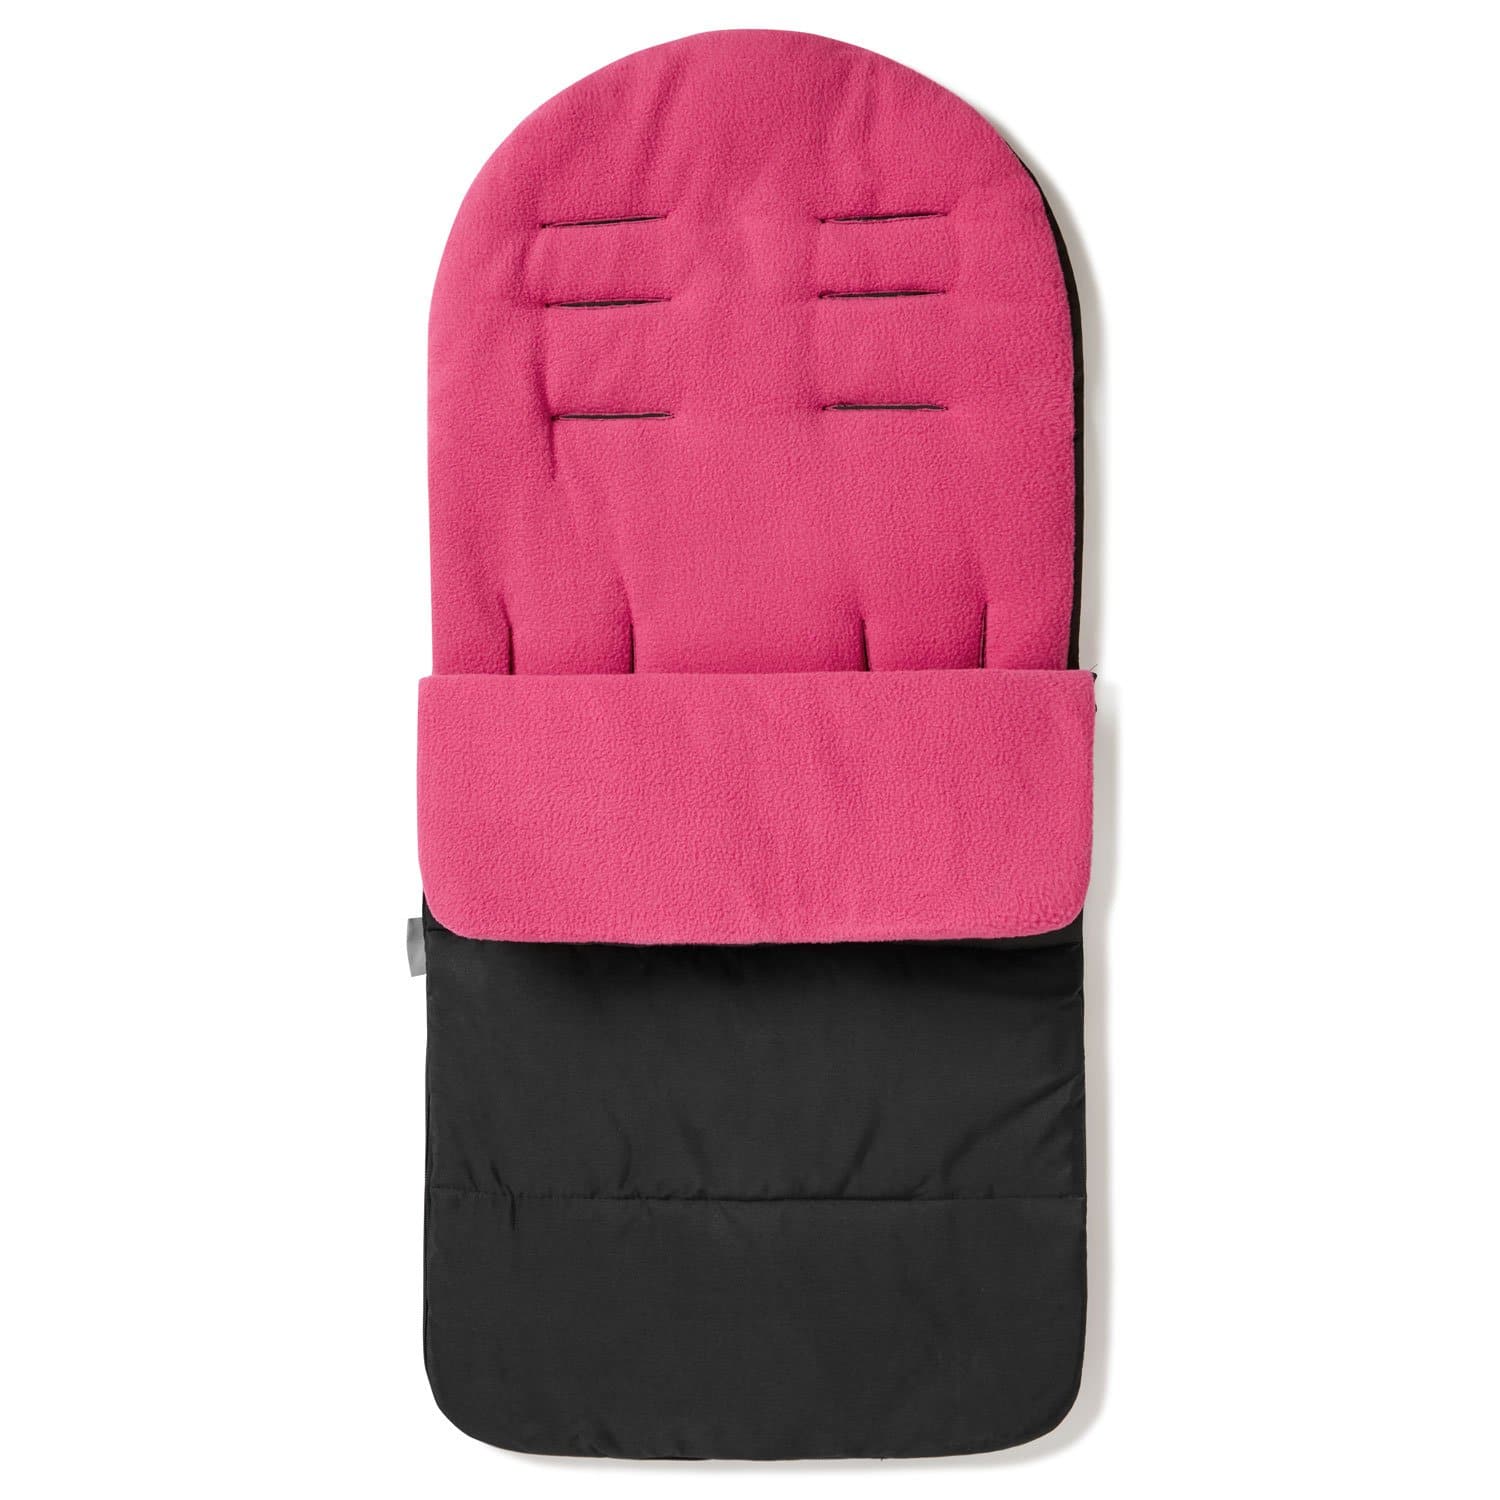 Premium Footmuff / Cosy Toes Compatible with Bumbleride - Pink Rose / Fits All Models | For Your Little One